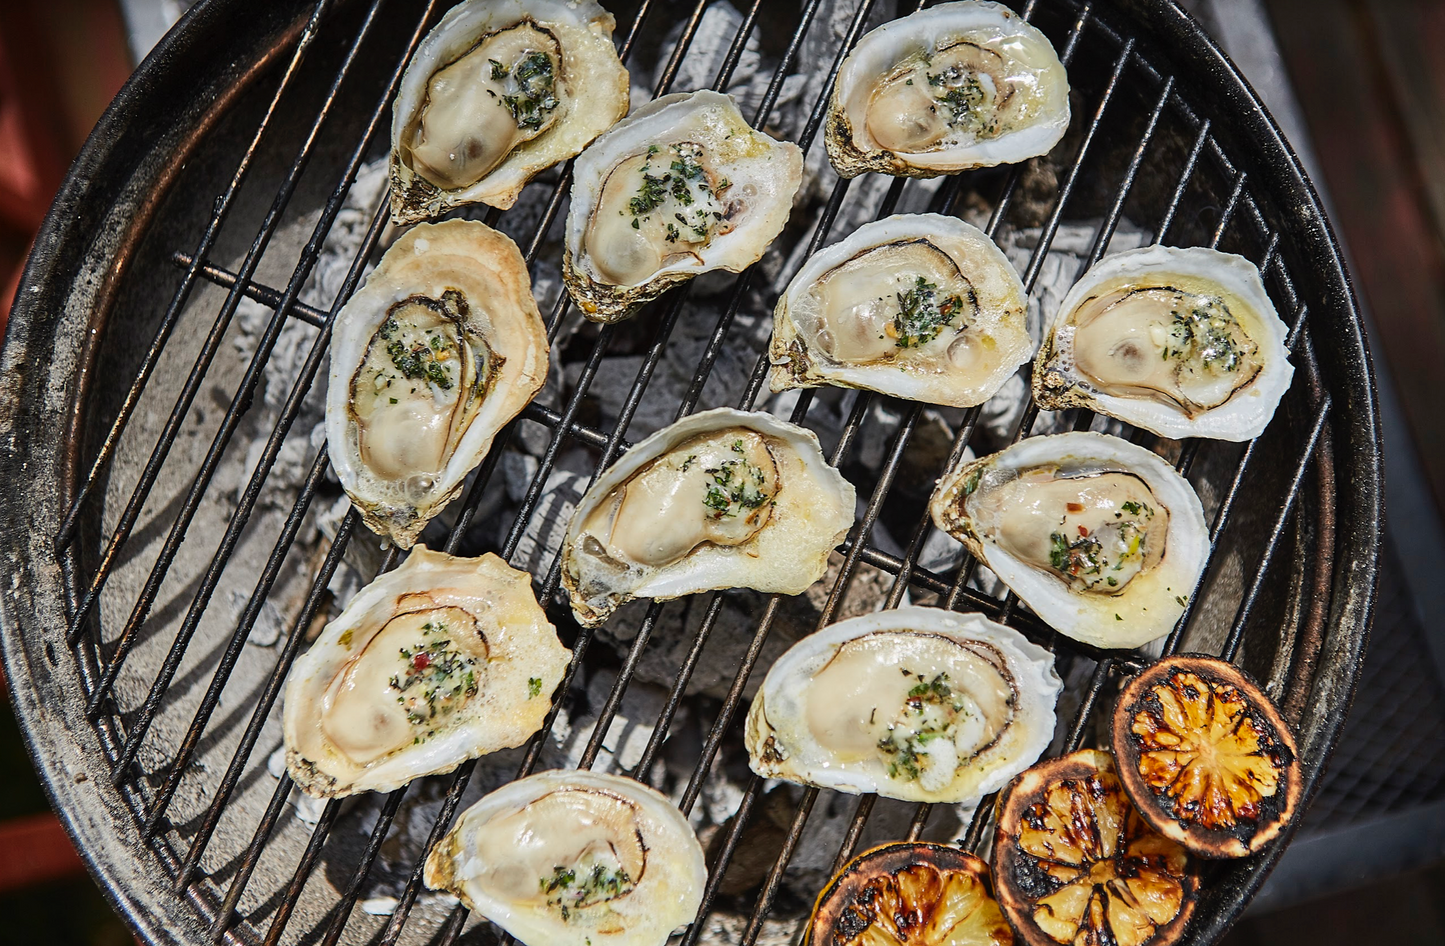 Take your oysters camping! Learn how to prep and cook grilled oysters for your next camping trip